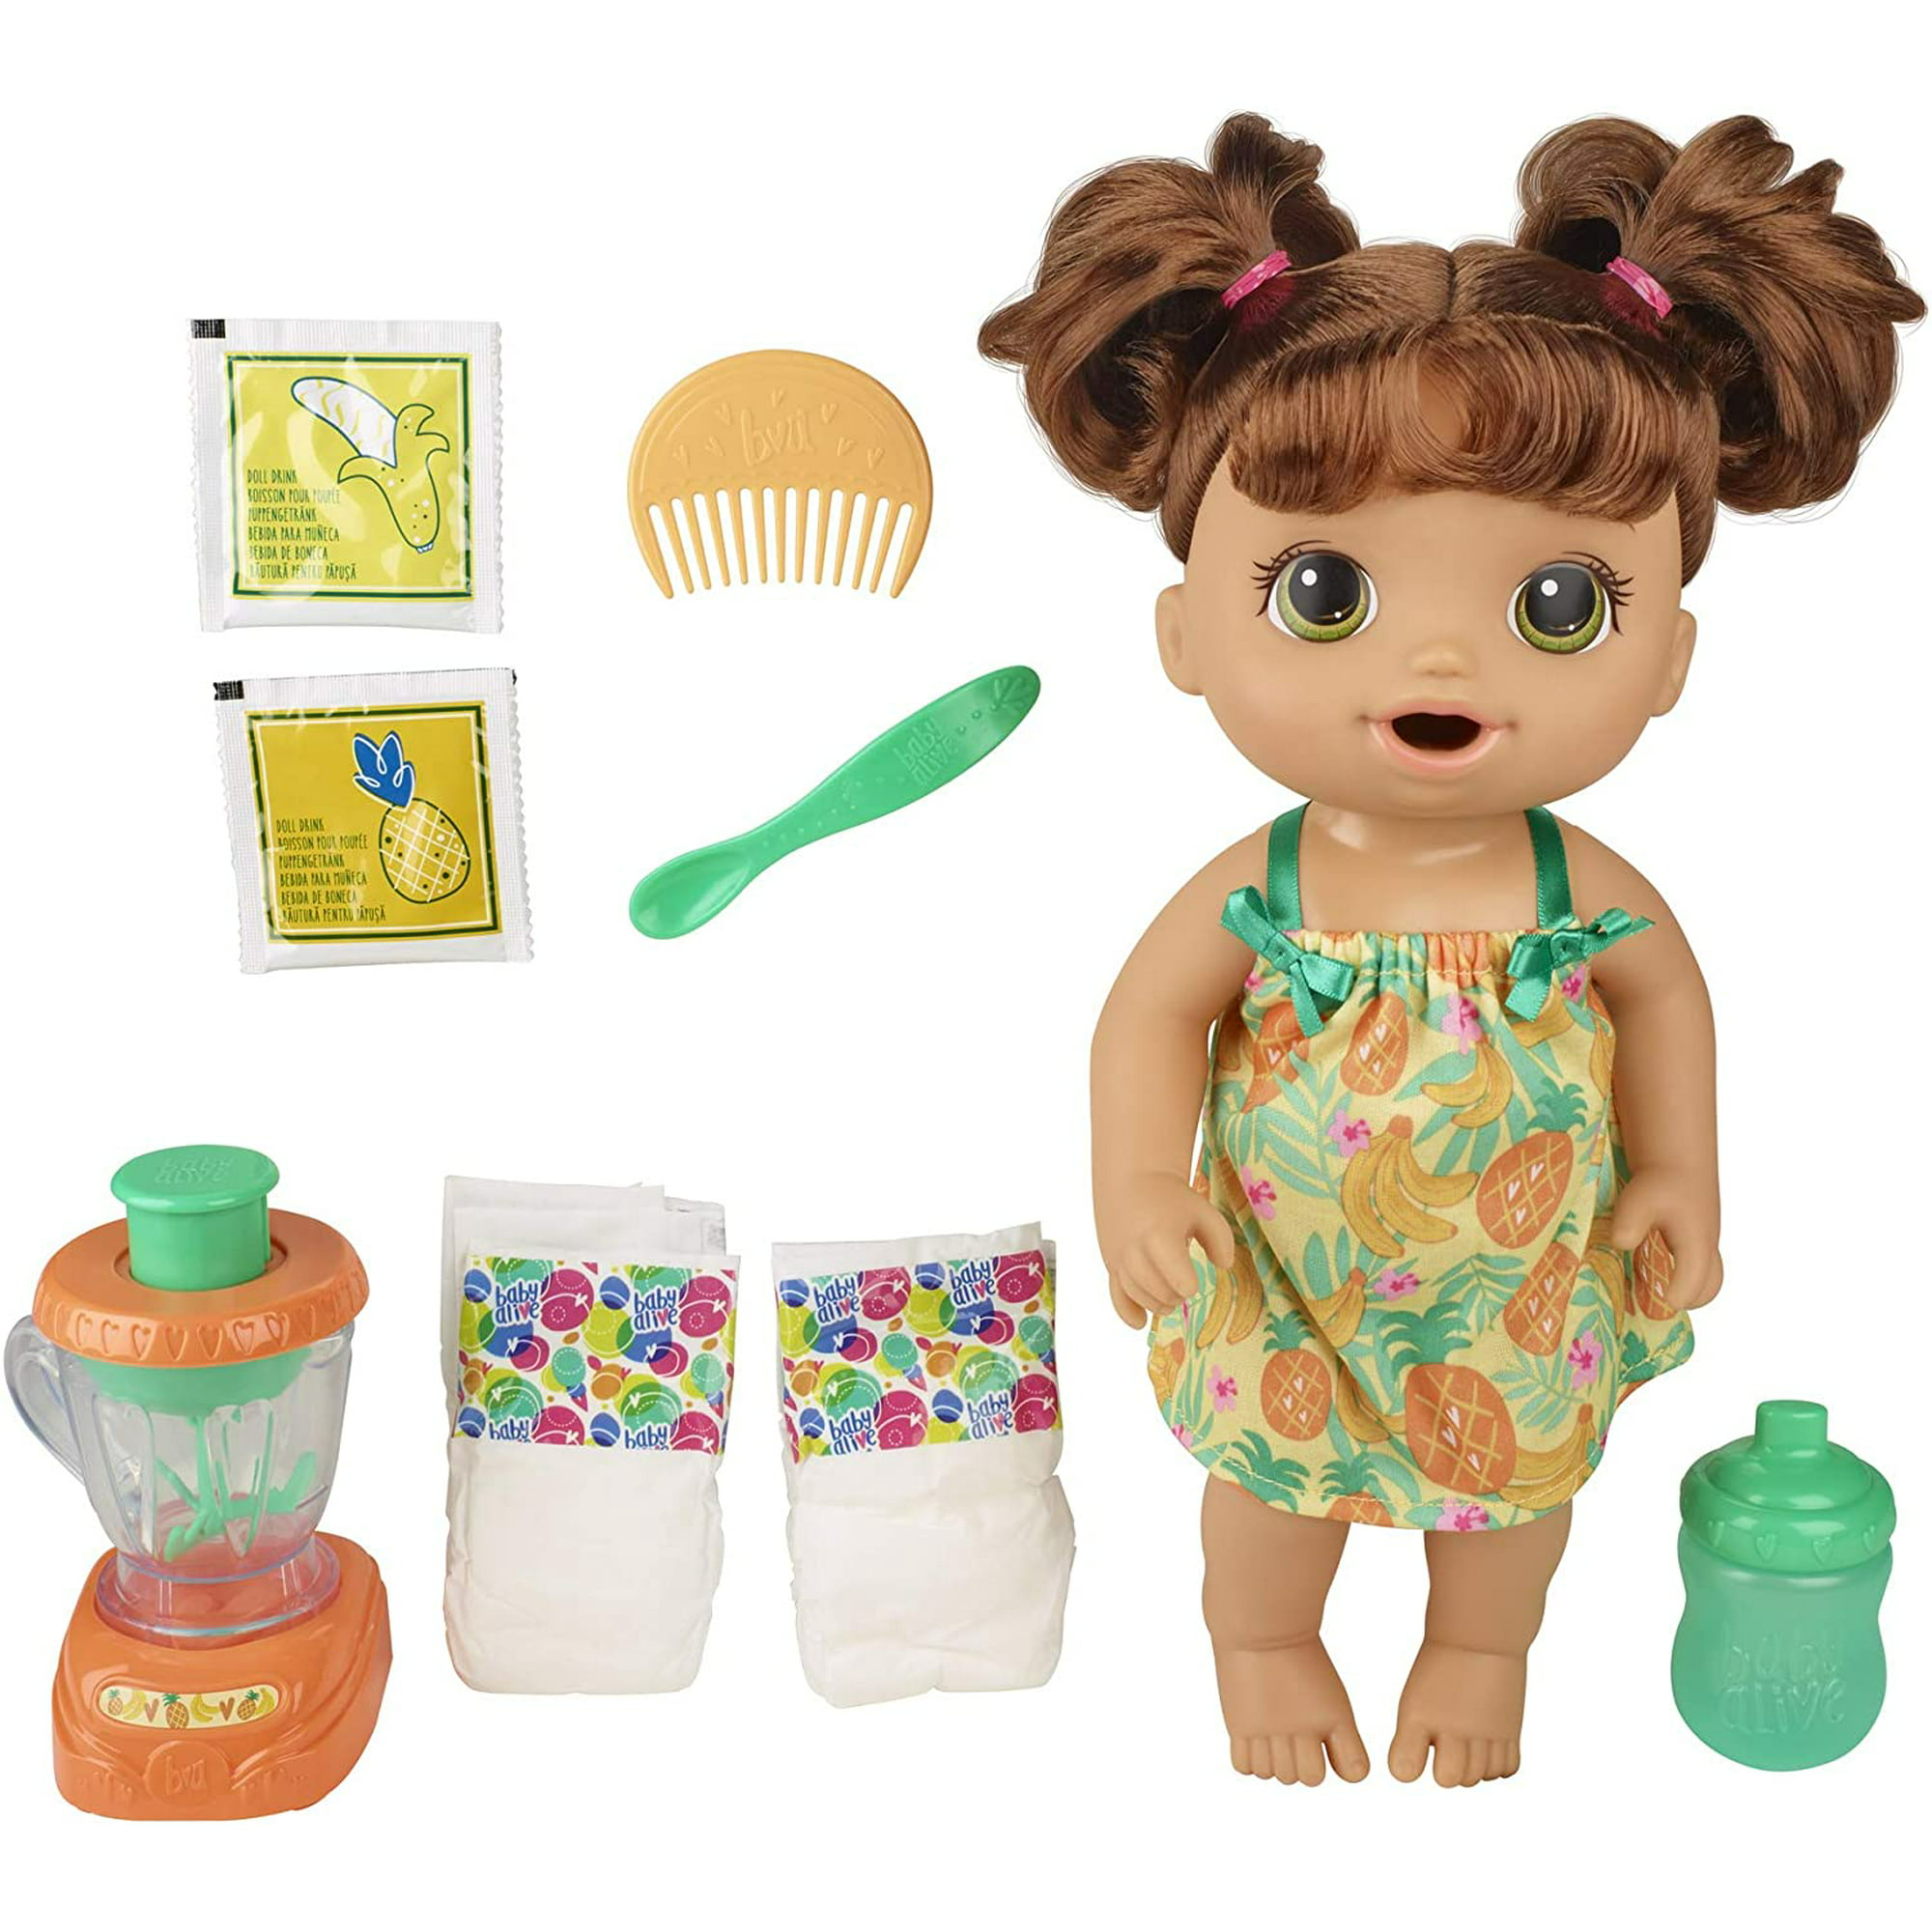 Baby Alive Magical Mixer Baby Doll Tropical Treat with Blender Accessories, Drinks, Wets, Eats, Brown Hair Toy for Kids Ages 3 and Up - image 1 of 7